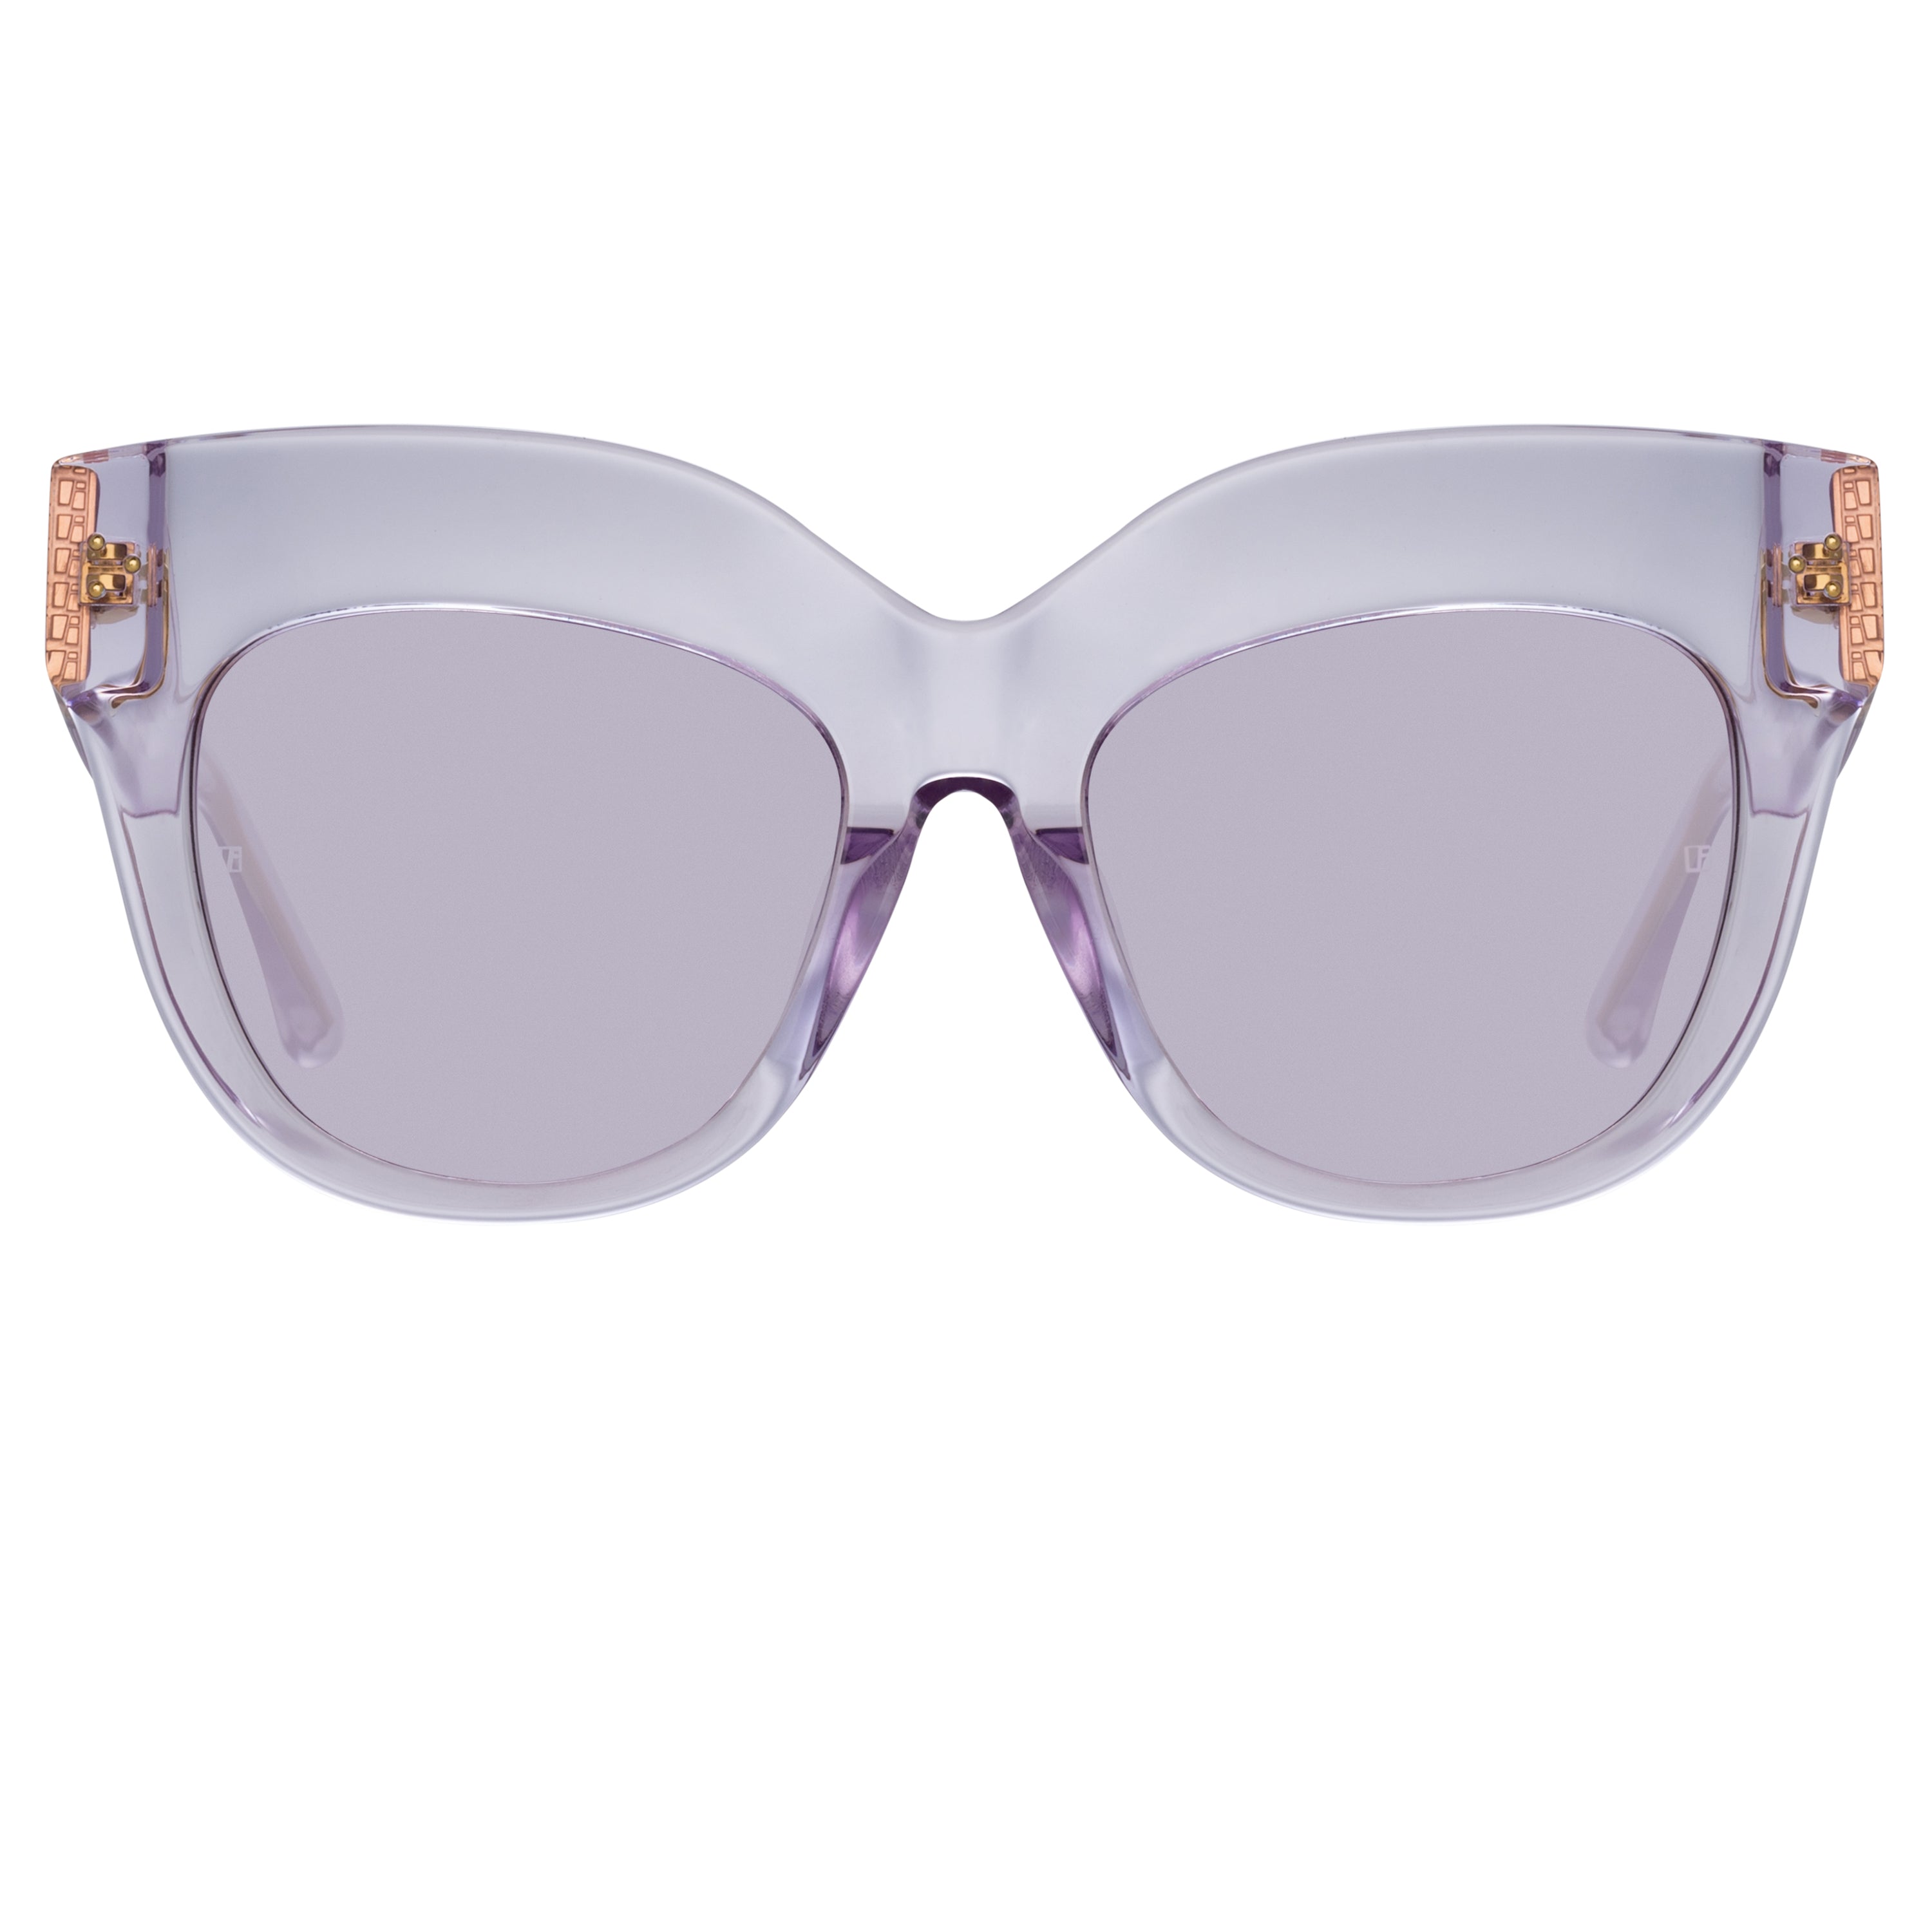 Dunaway Oversized Sunglasses in Lilac